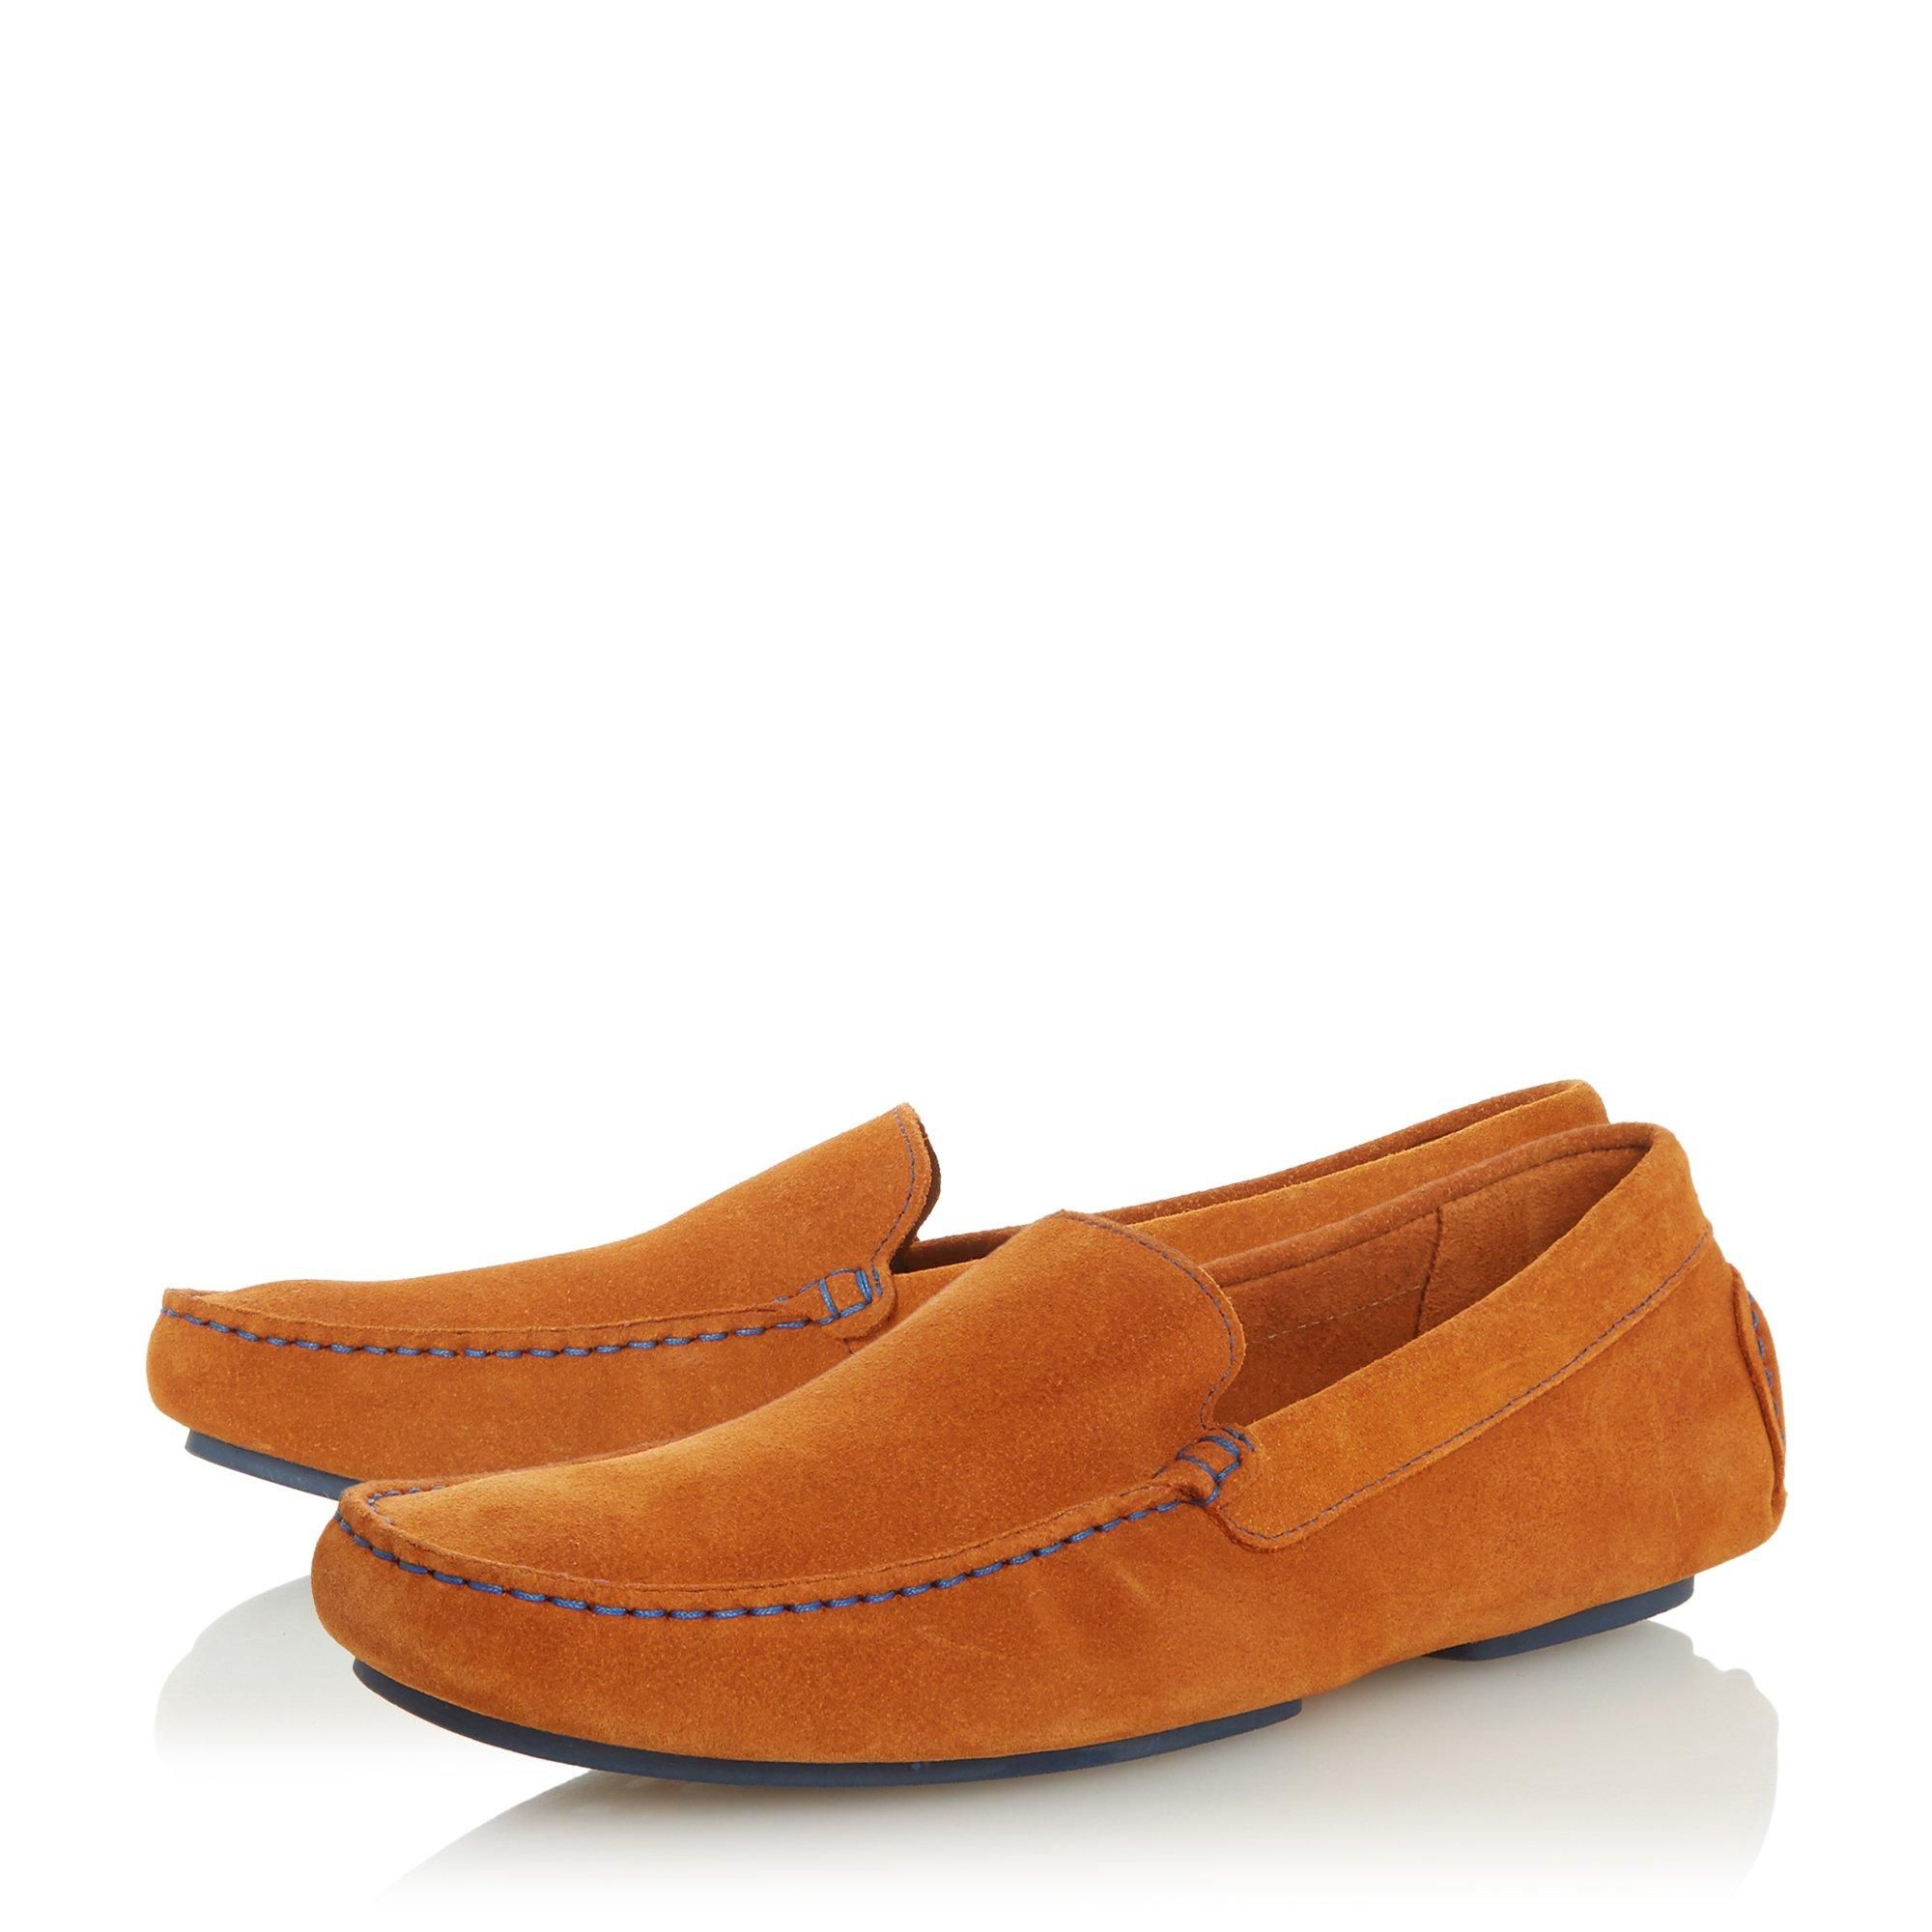 Create smart-casual looks with the Boabab loafer from Dune London. Showcasing a sleek driver design with contrast apron stitching. Complete with a smooth suede upper and practical rubber sole.